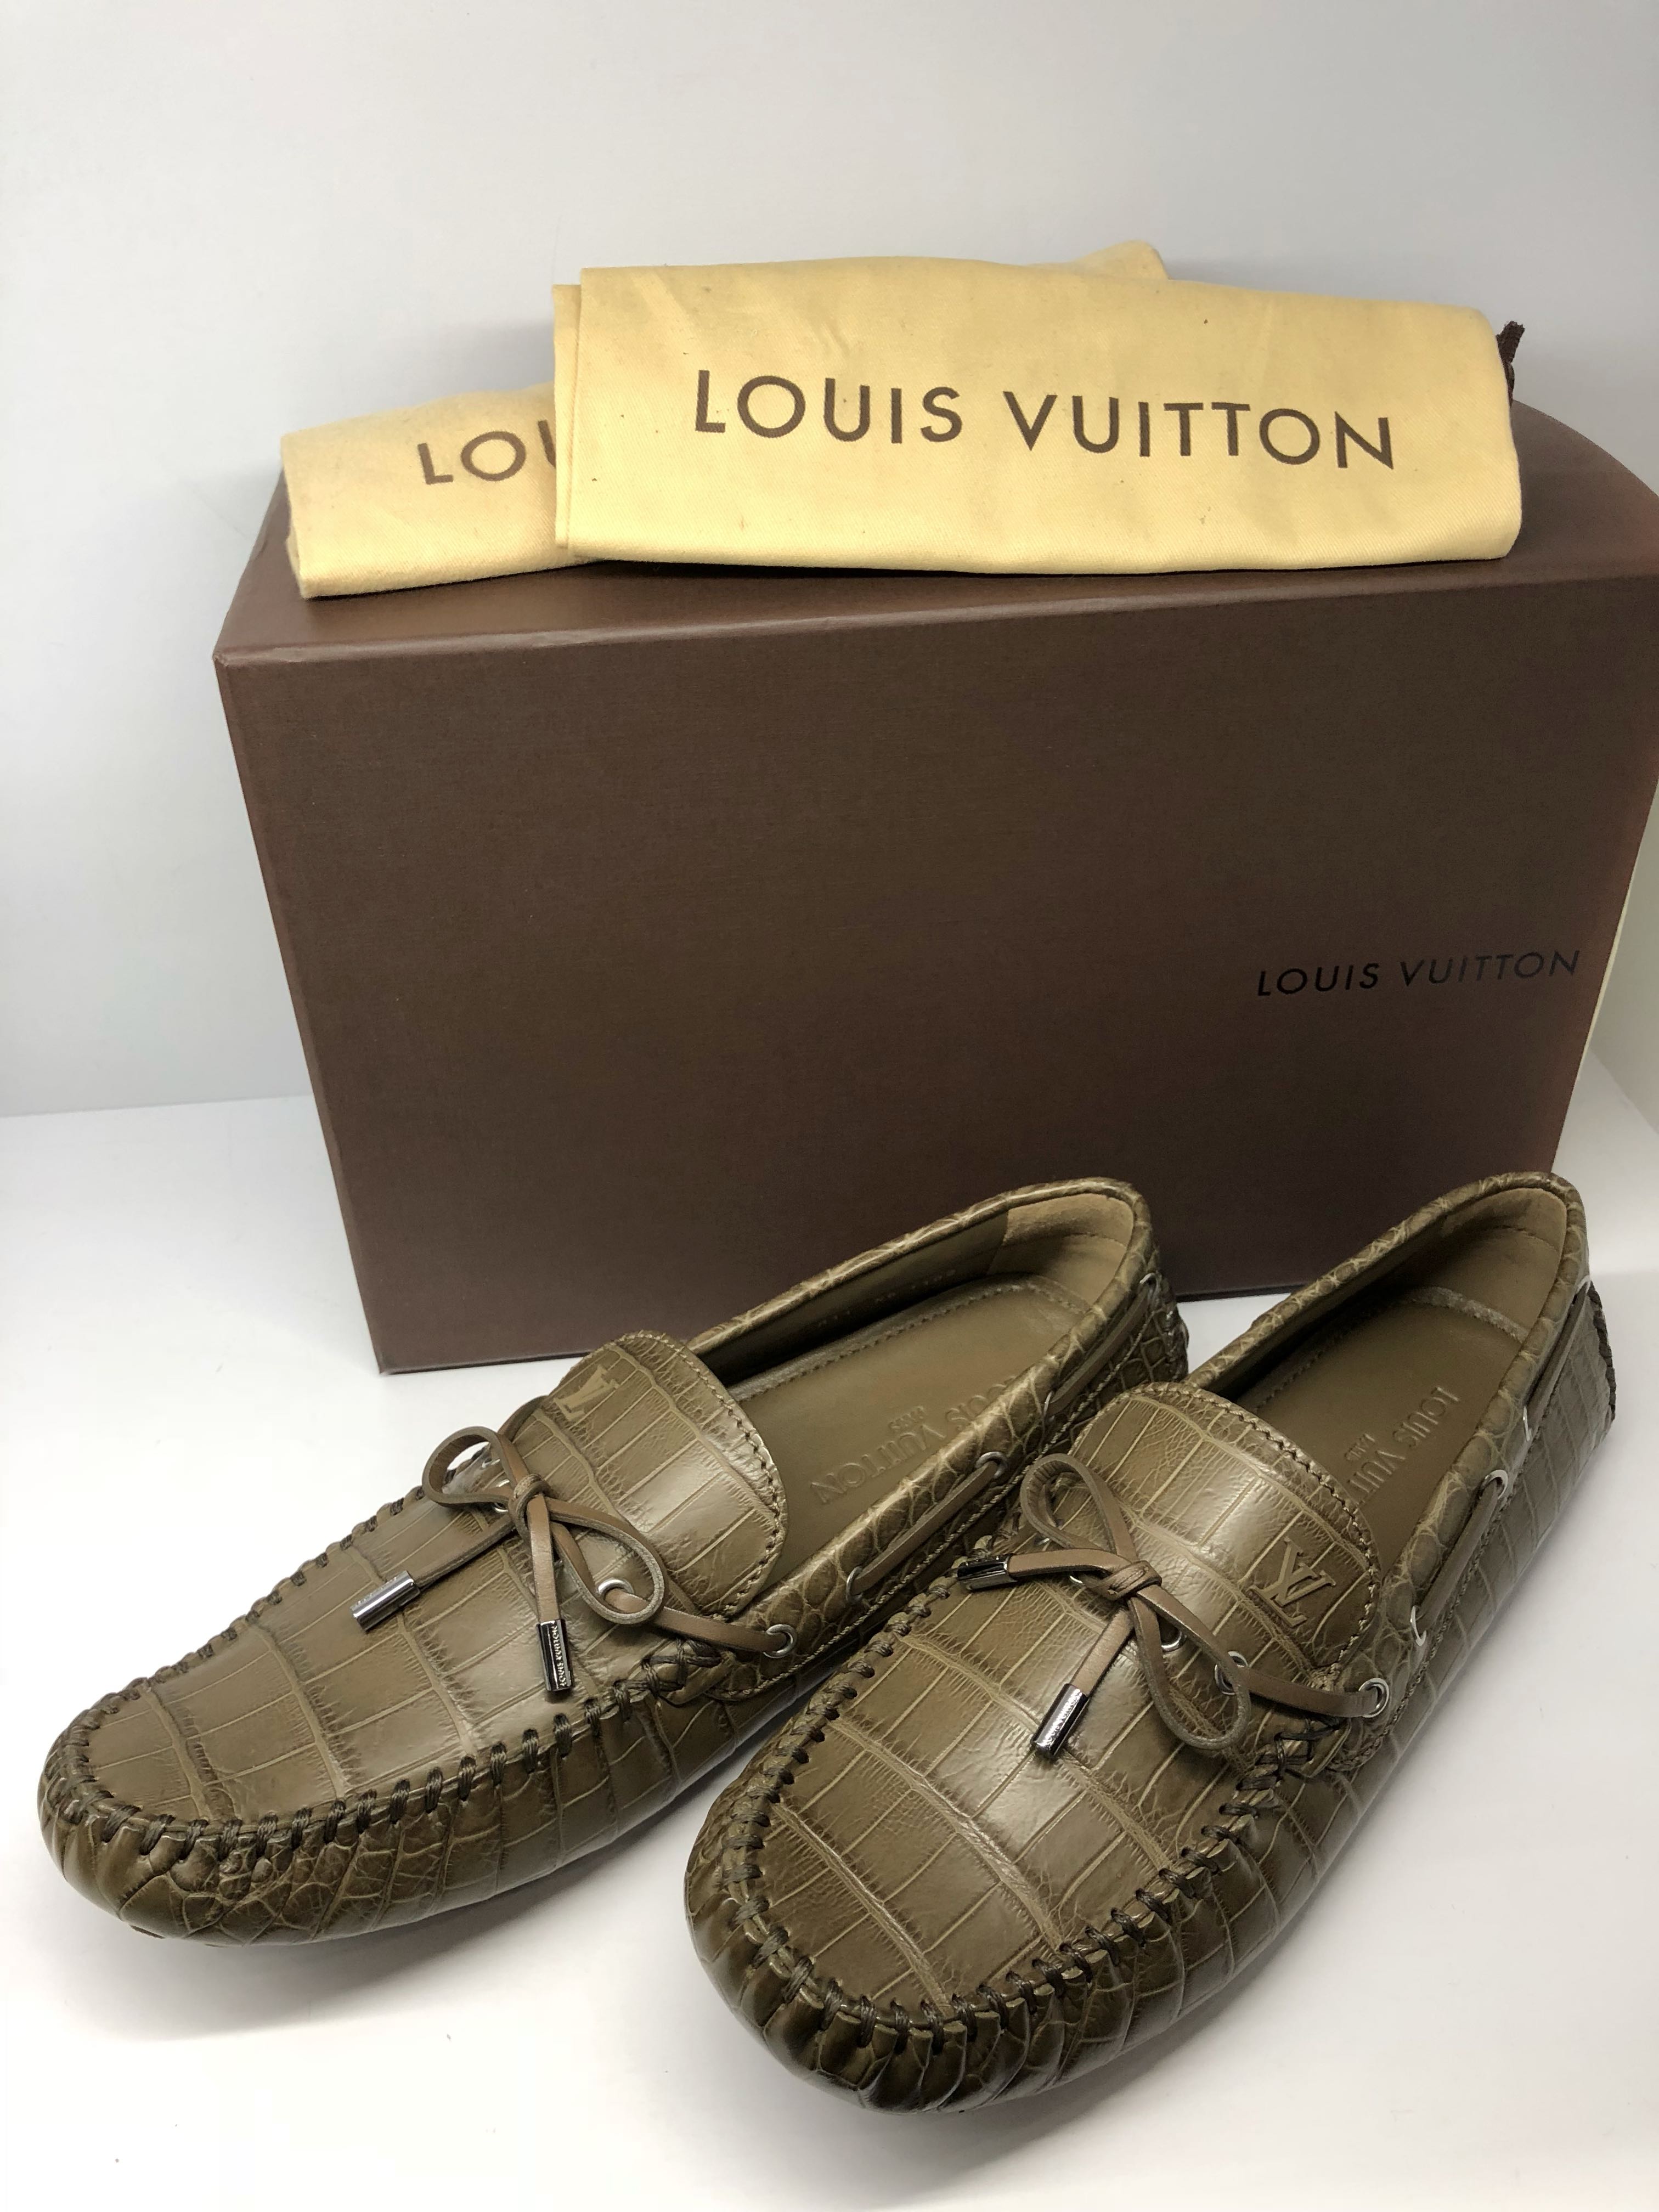 LOUIS VUITTON LV LOGO RED CROC LEATHER COMFY MOCCASIN DRIVING